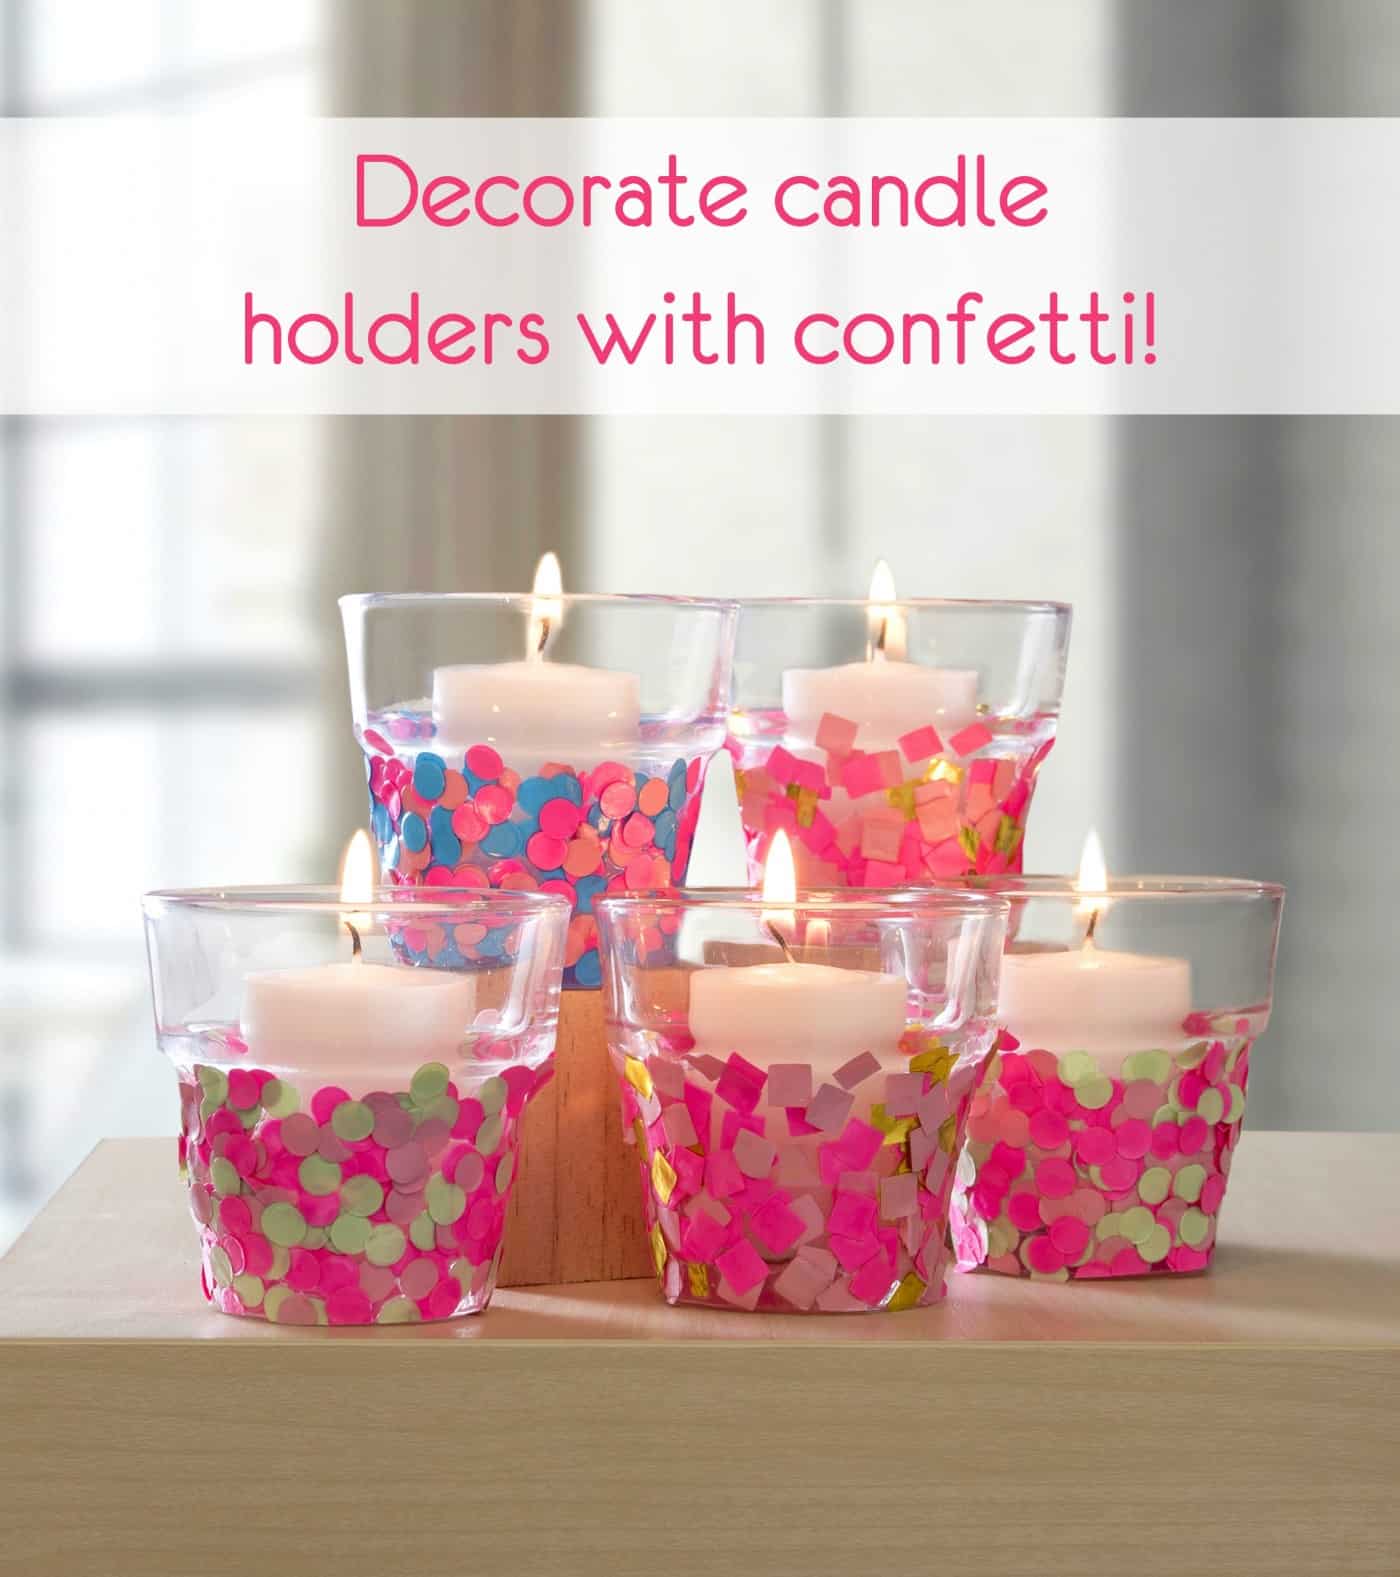 Make Confetti Candle Holders on the Cheap